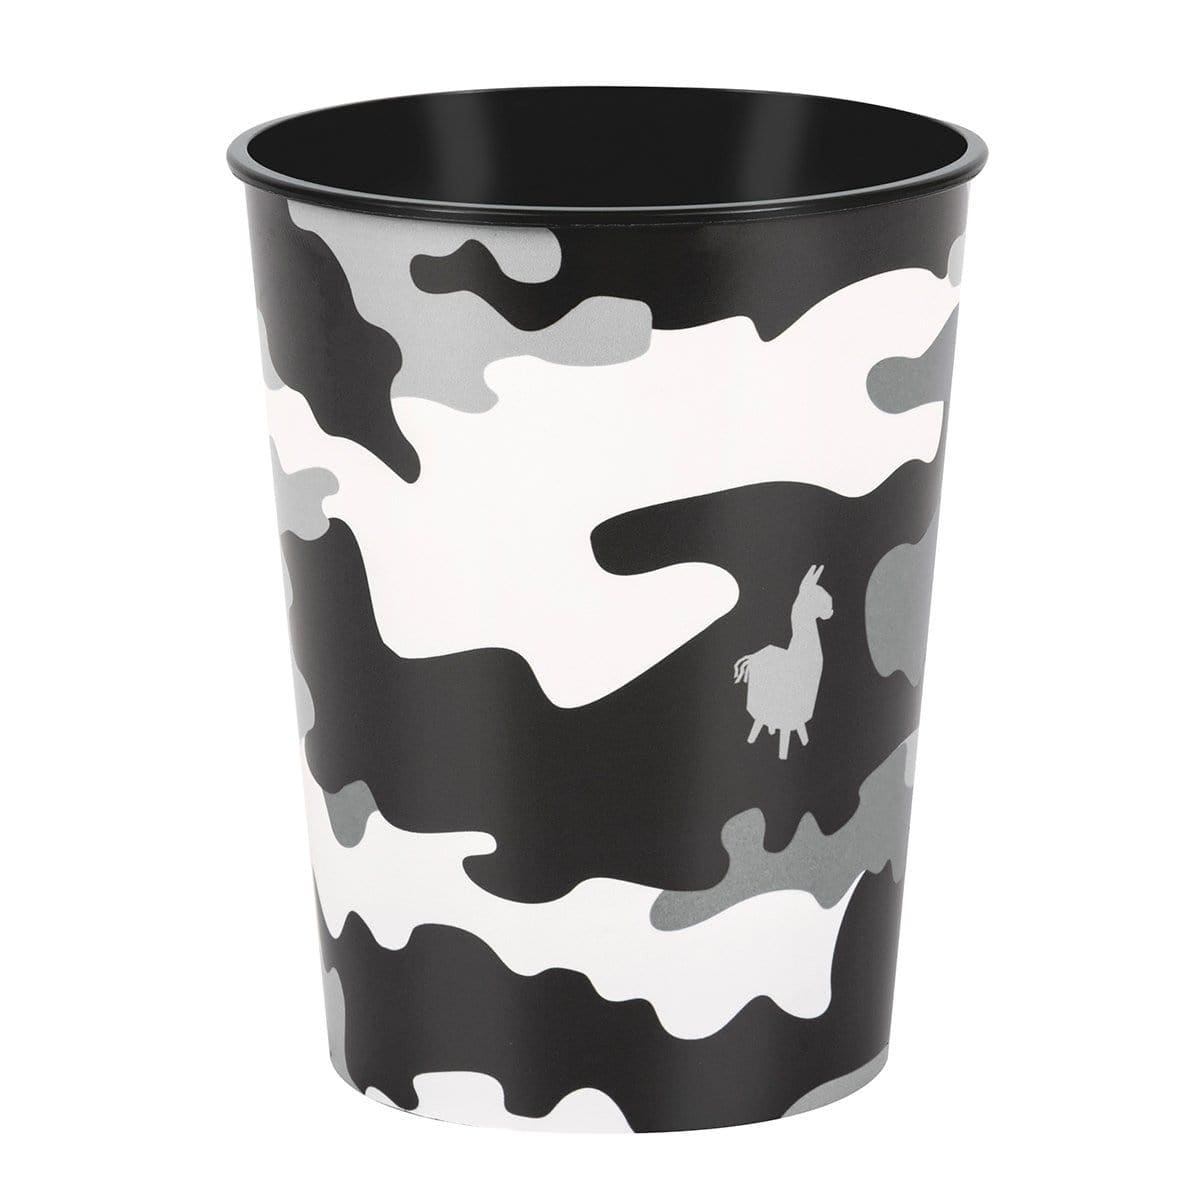 Buy Kids Birthday Fortnite Camo Favor Cup 16 oz. sold at Party Expert